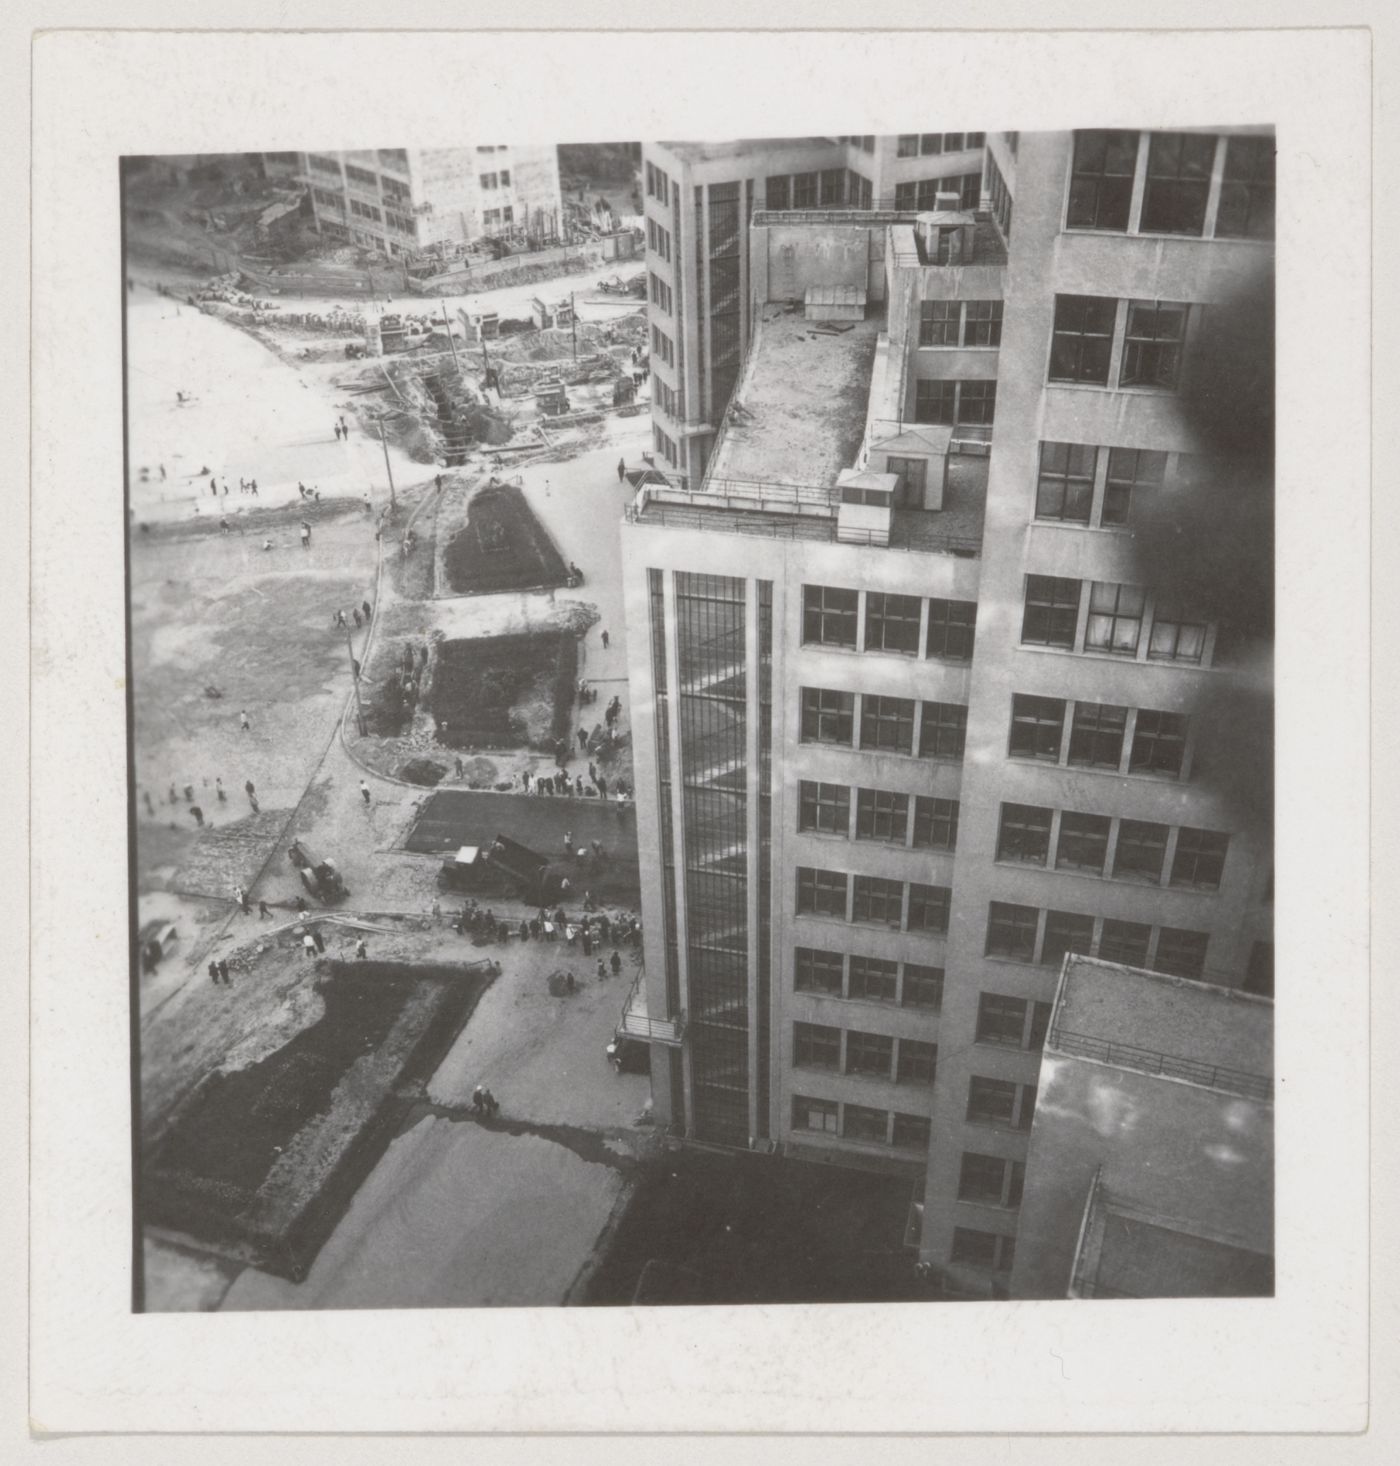 Bird's-eye view of the Department of Industry and Planning (Gosprom) buildings showing Dzerzhinskaya Square under construction, Kharkov, Soviet Union (now in Ukraine)